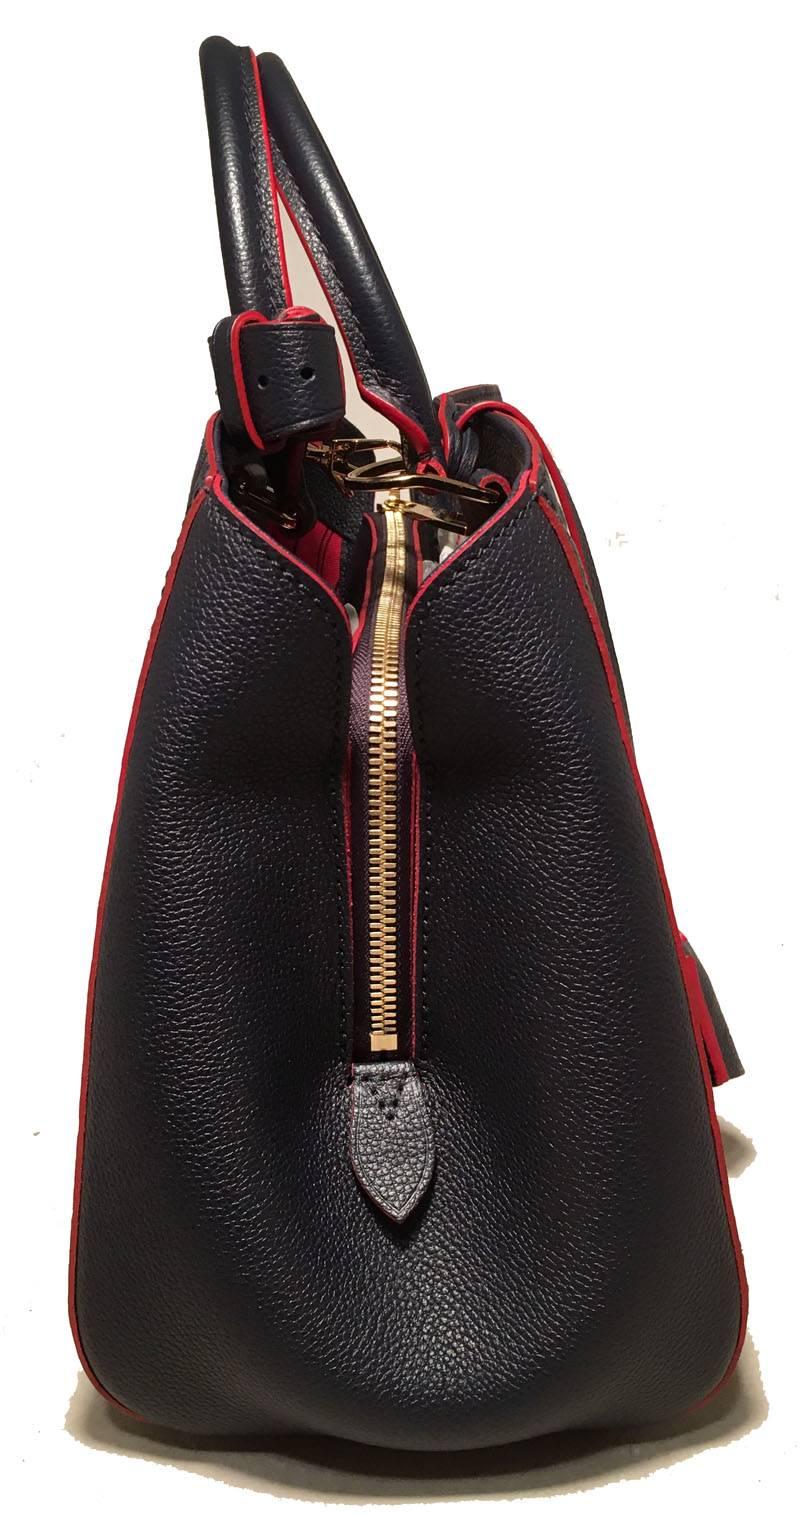 NWOT Louis Vuitton Navy Empreinte Leather Monogram Montaigne MM Handbag in excellent condition.  Navy blue embossed monogram empreinte leather with red trim and gold hardware.  Double handles and removable matching navy shoulder strap.  Leather